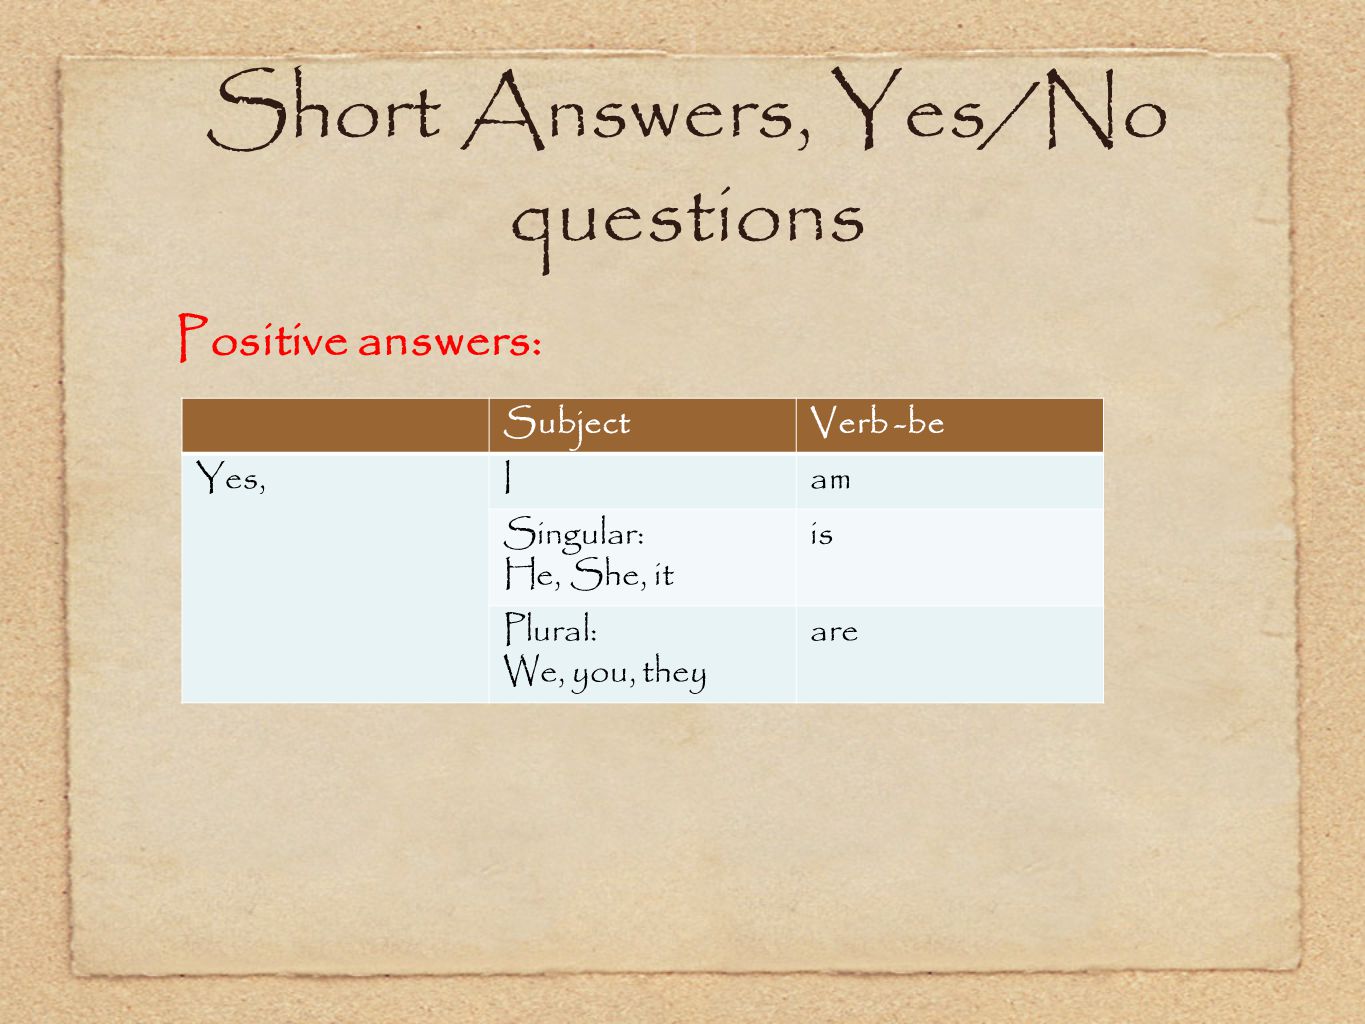 Short Answers, Yes/No questions Positive answers: SubjectVerb -be Yes,Iam Singular: He, She, it is Plural: We, you, they are